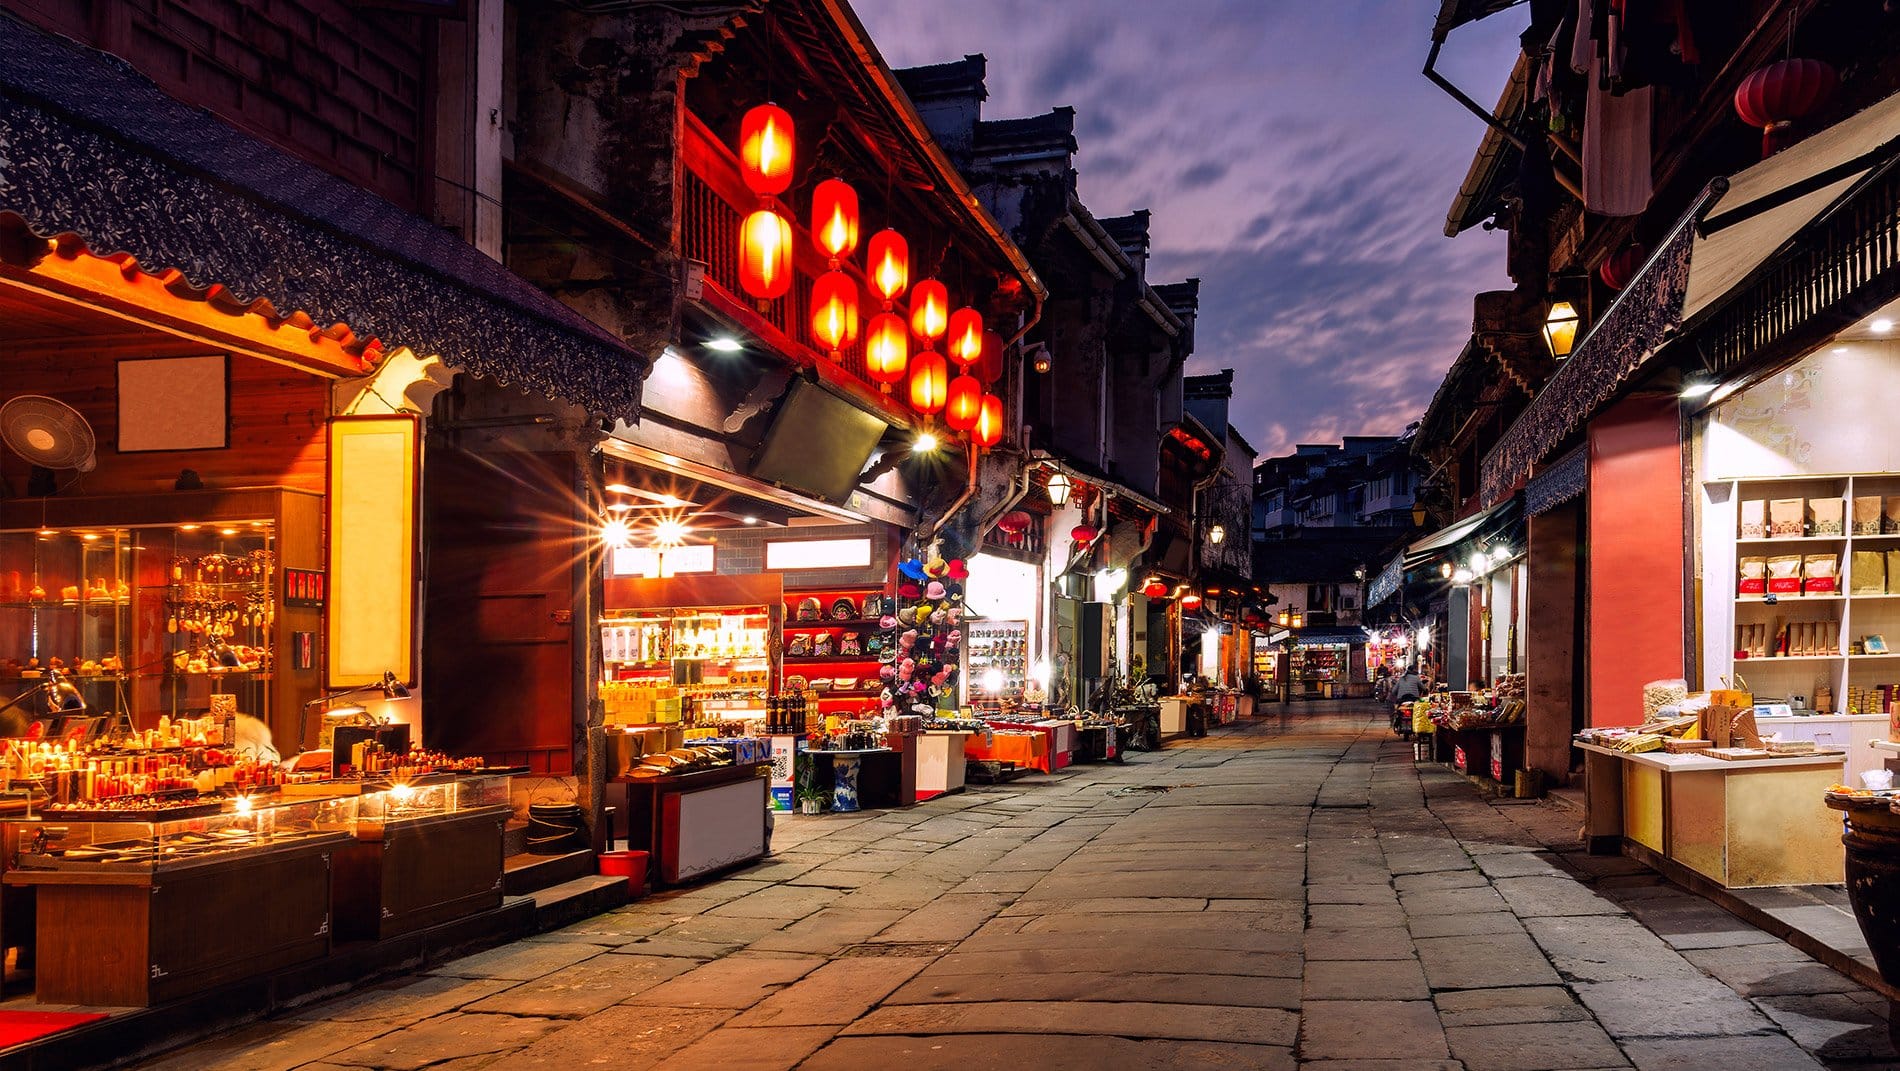 Huangshan Old Street~In the heart of the ancient downtown area, this street has been bustling with activity for over 400 years. From ink stones to calligraphy brushes, dried teas to ink sticks, it focuses on the treasures of the traditional scholar.